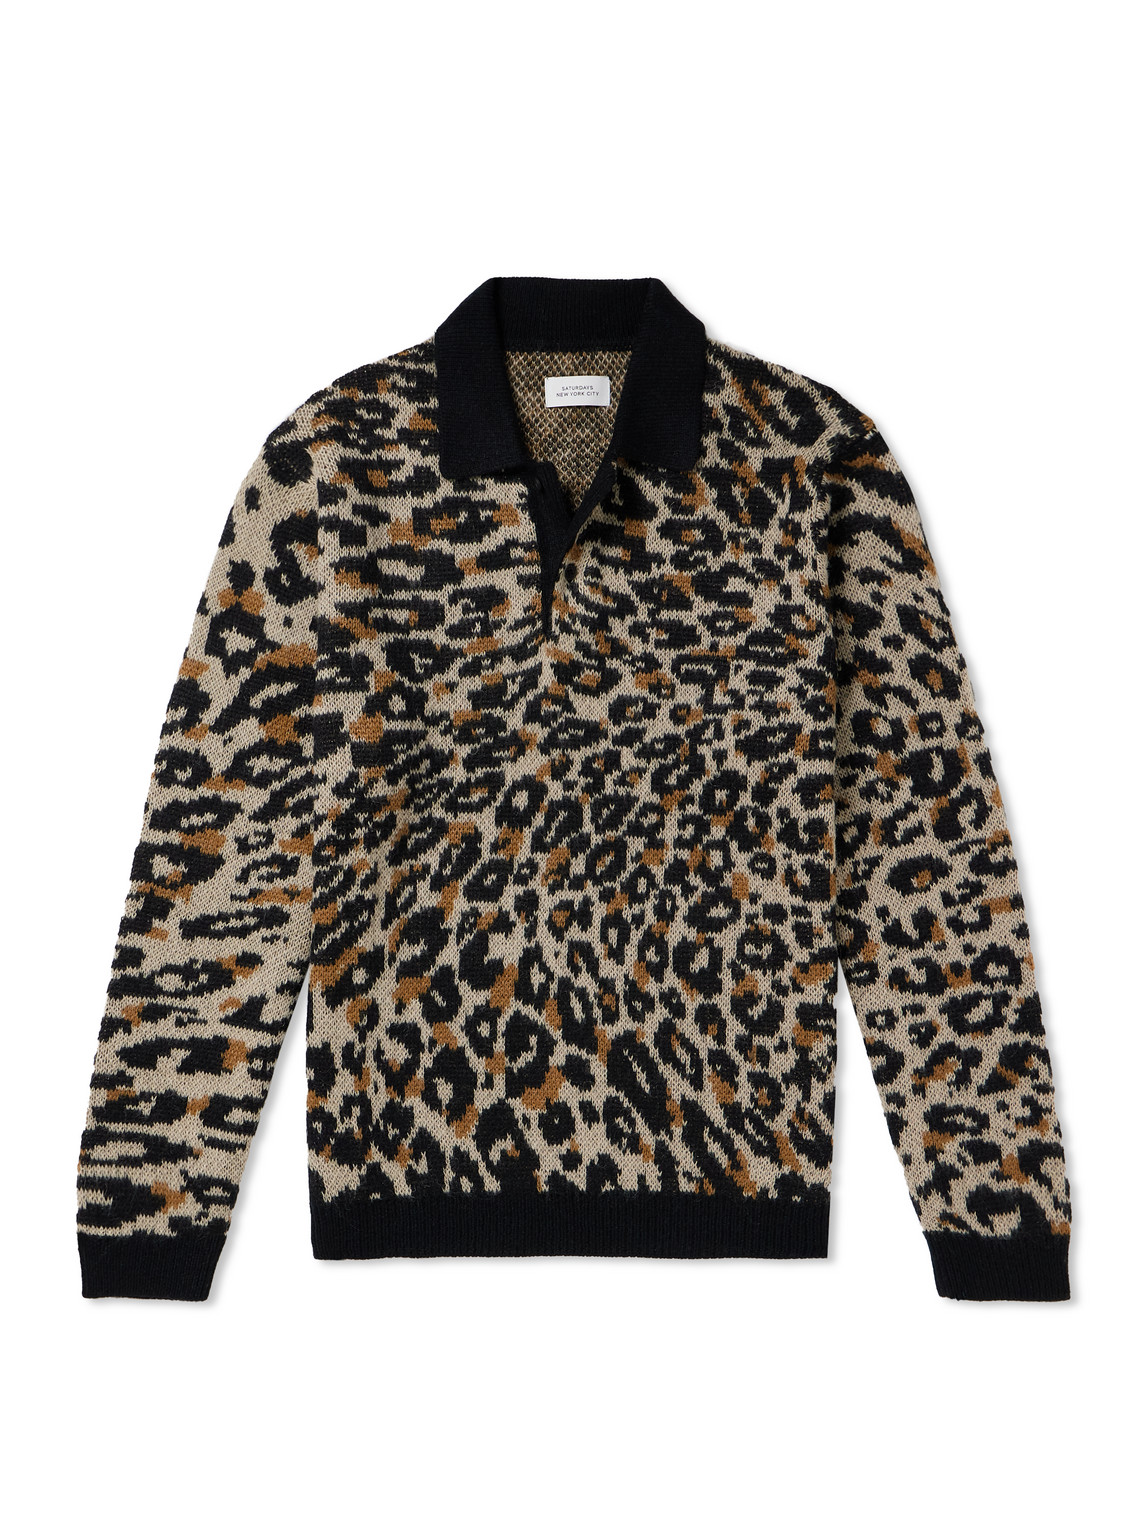 SATURDAYS SURF NYC BEAUCHAMP LEOPARD-PRINT KNITTED POLO SHIRT